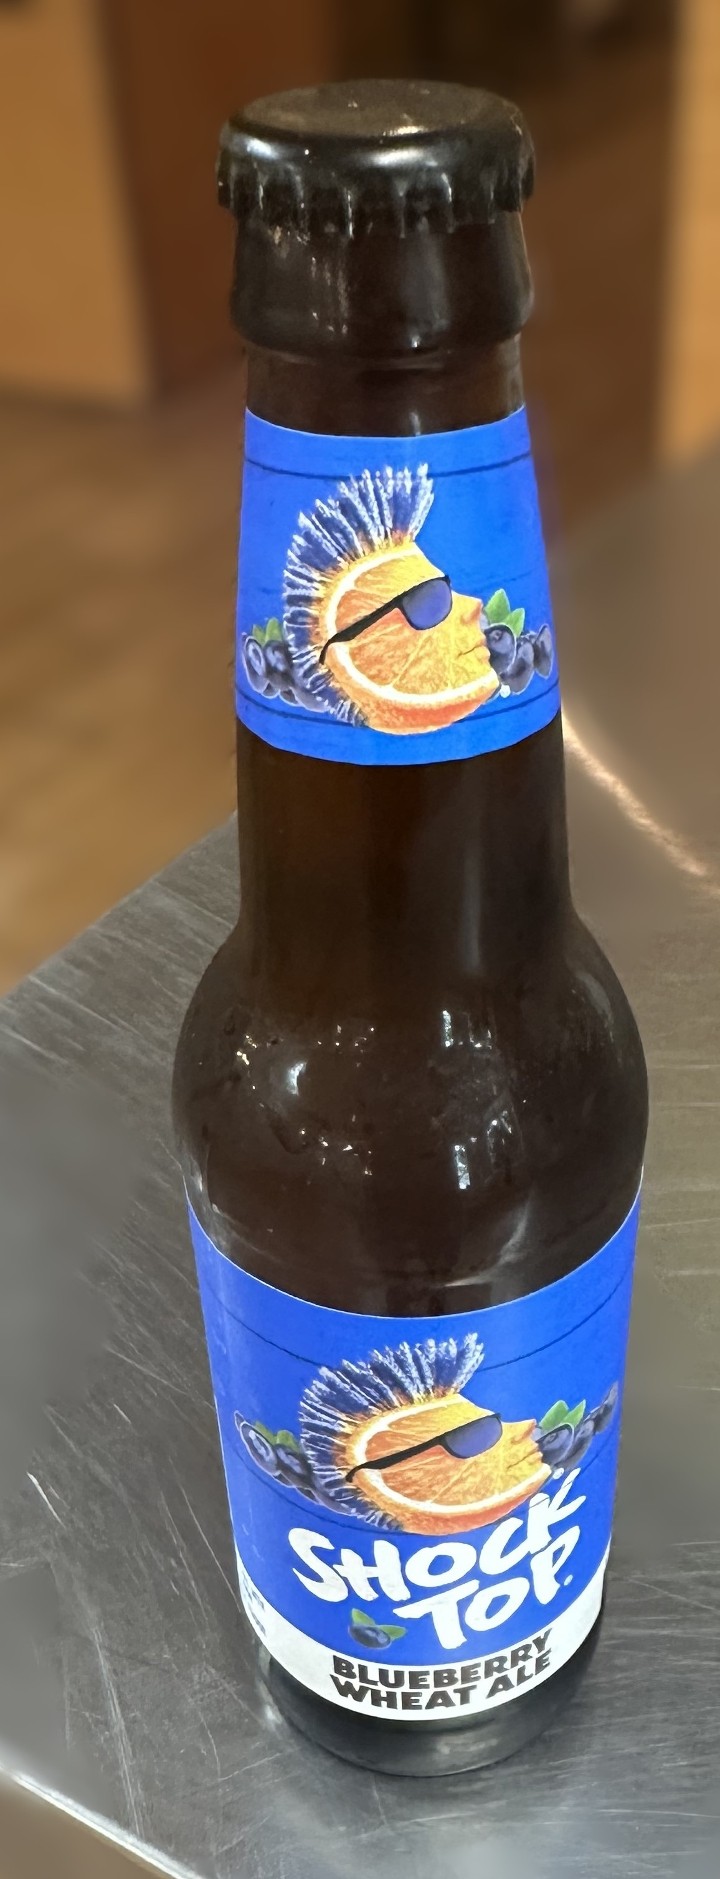 Shock Top Blueberry